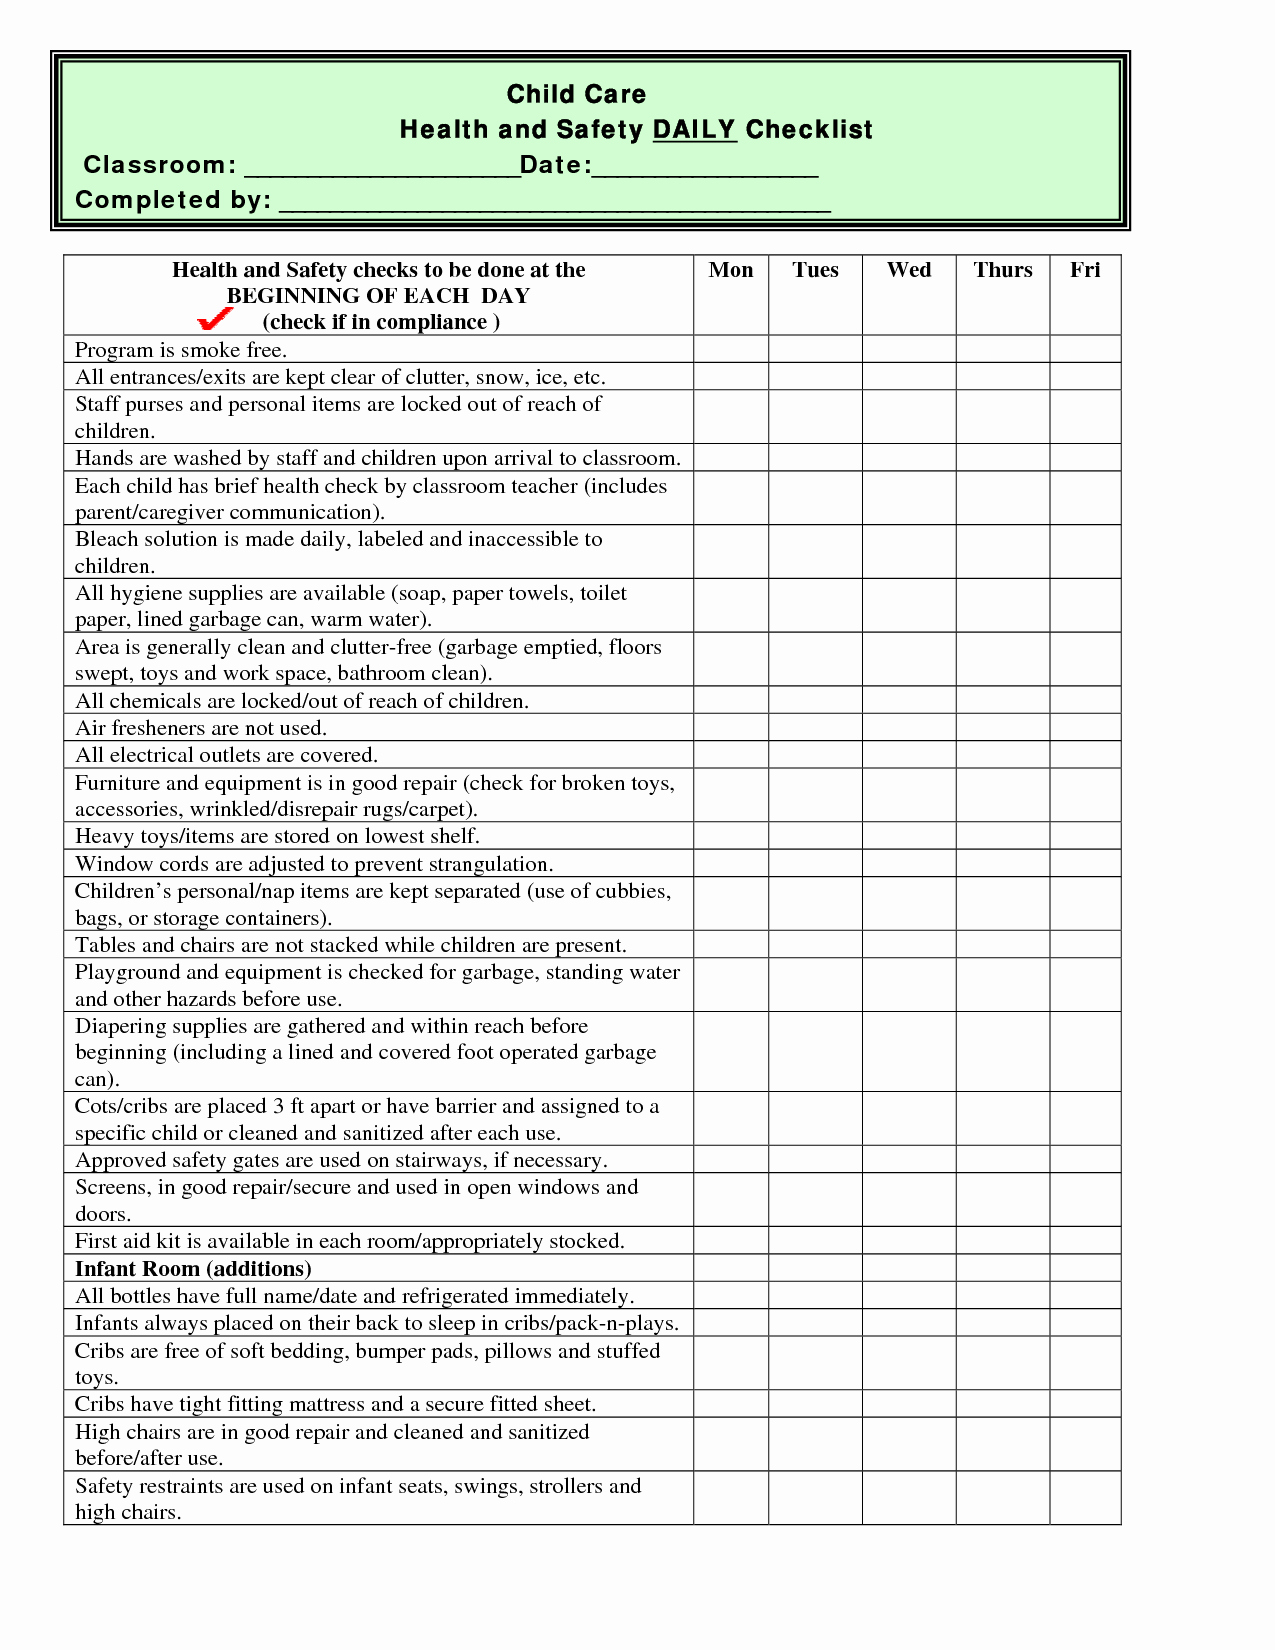 Child Safety Plan Template Luxury Child Care Health and Safety Daily Checklist Classroom